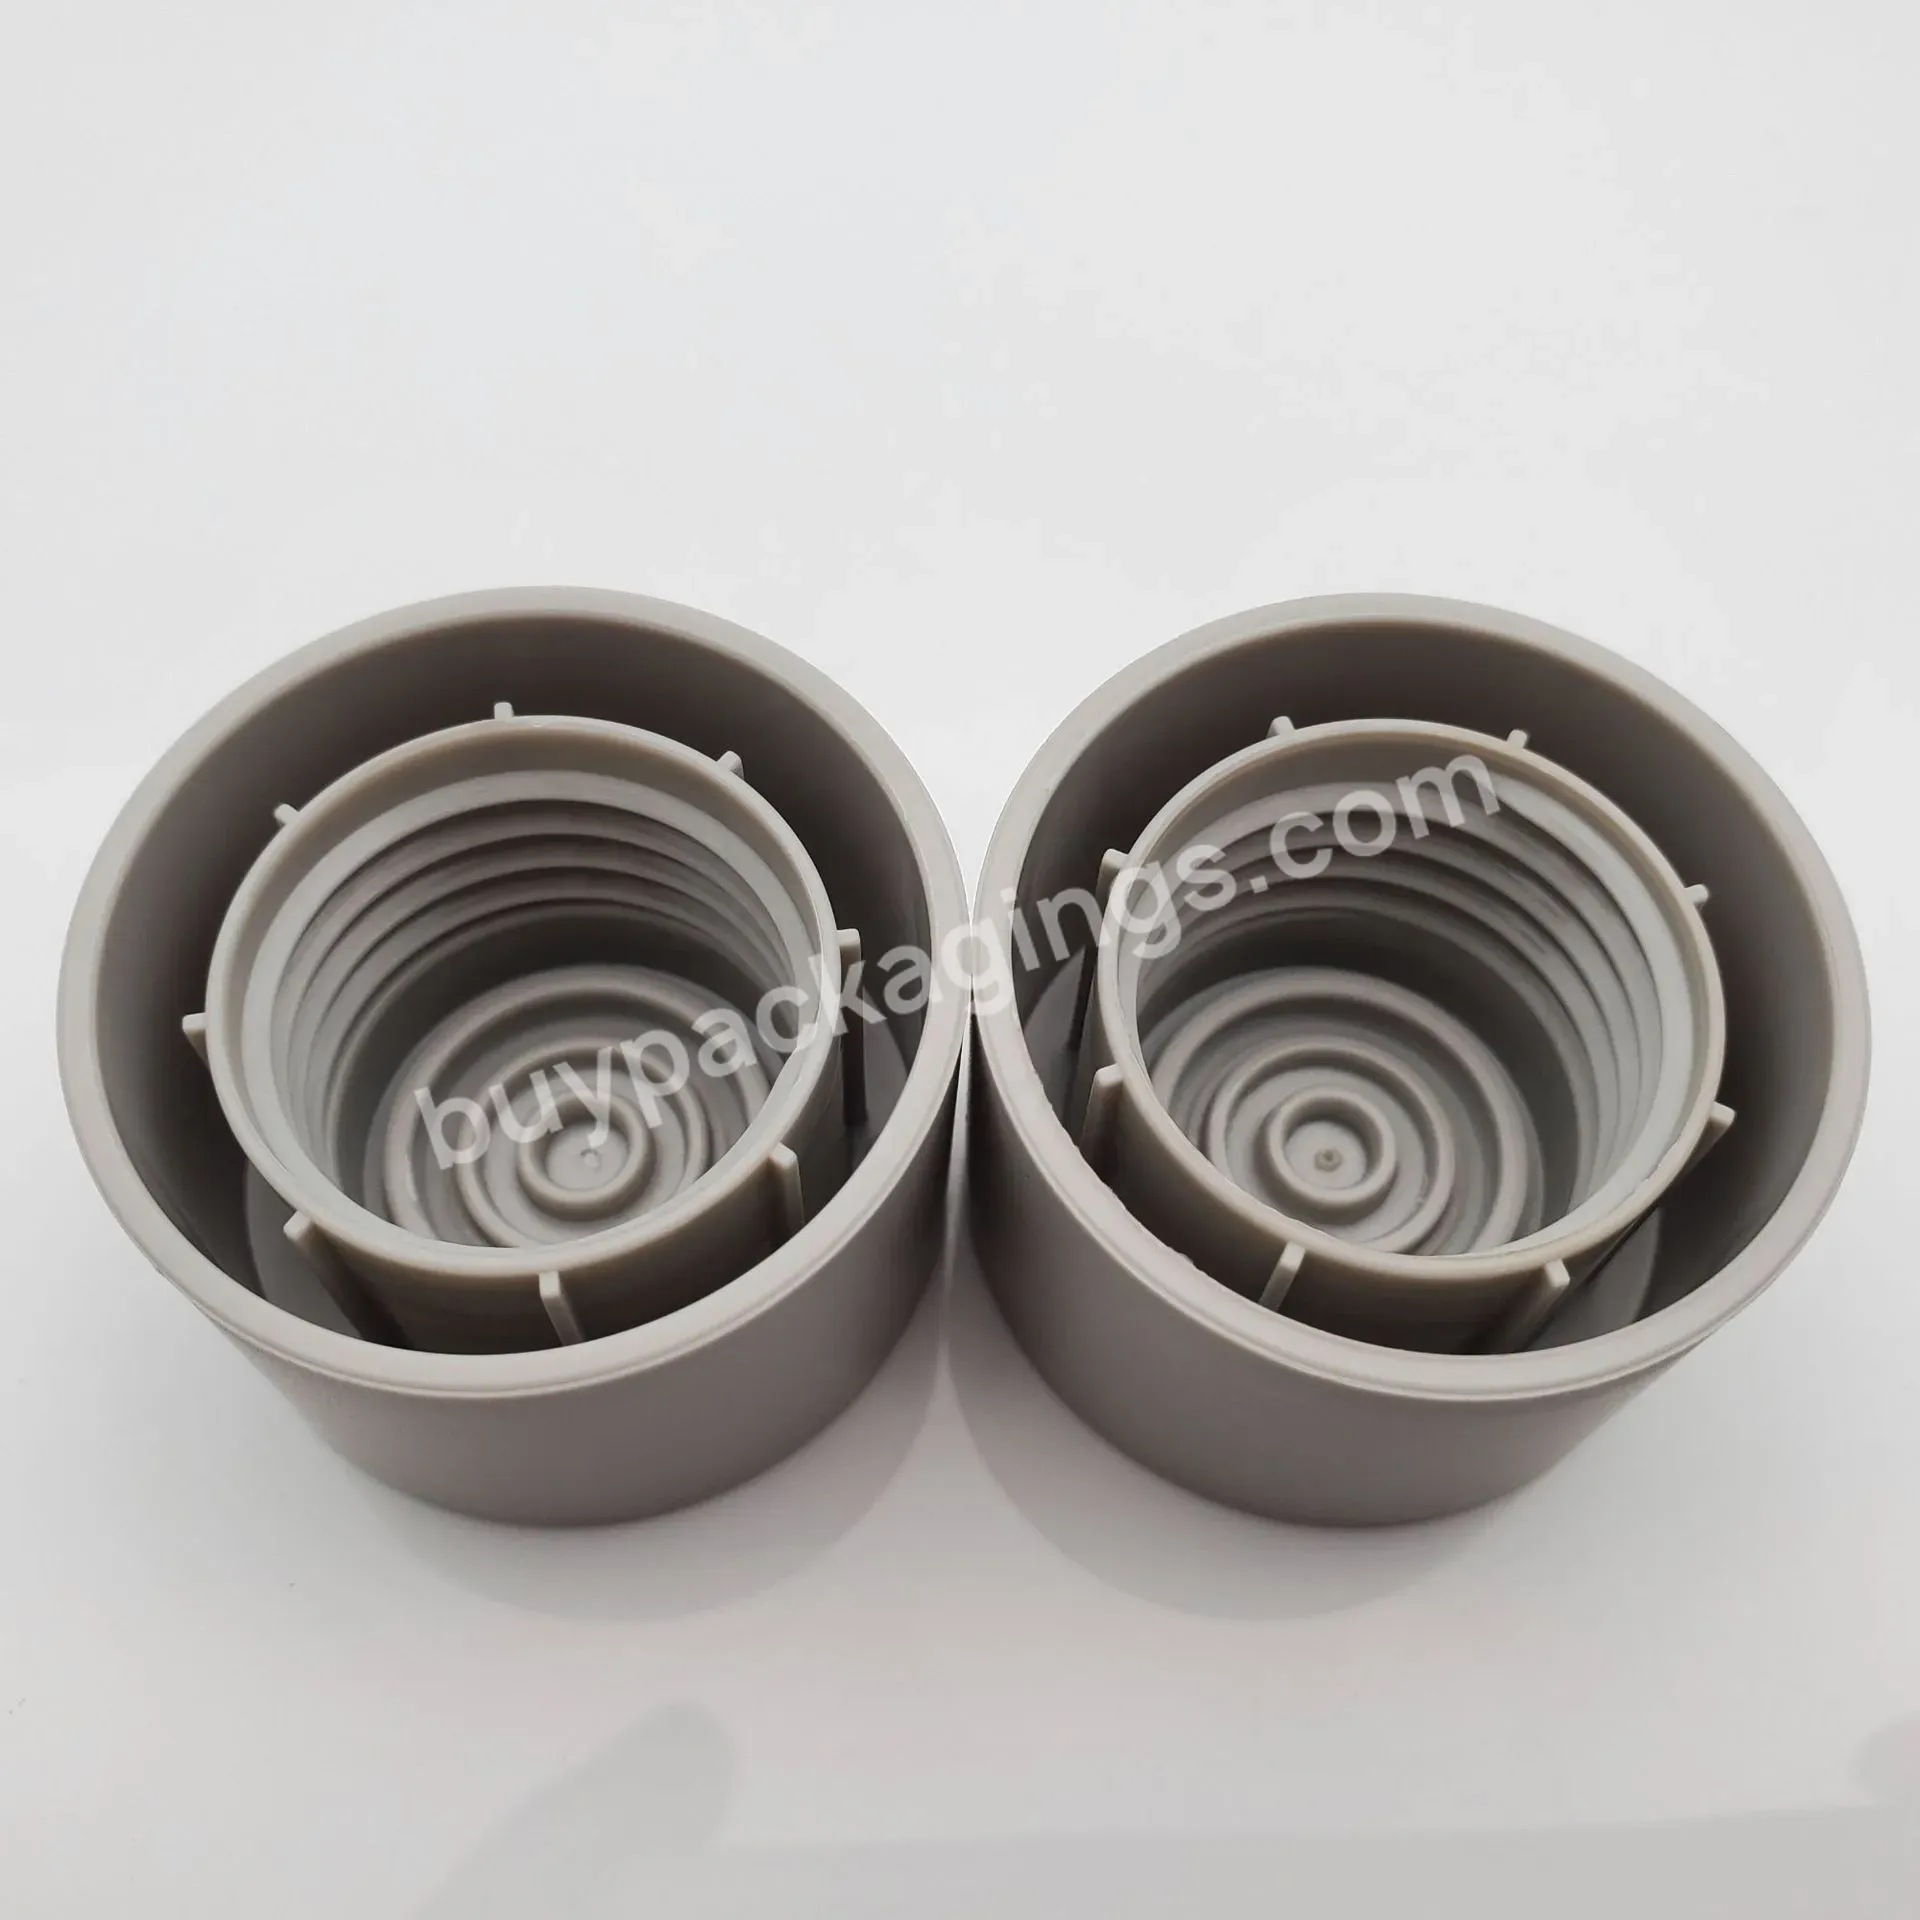 Double Layers Two Layers 24mm 24/410 Matte Finish Screw Cap For Cosmetic Makeup Remover Cap Toner Bottle Cap